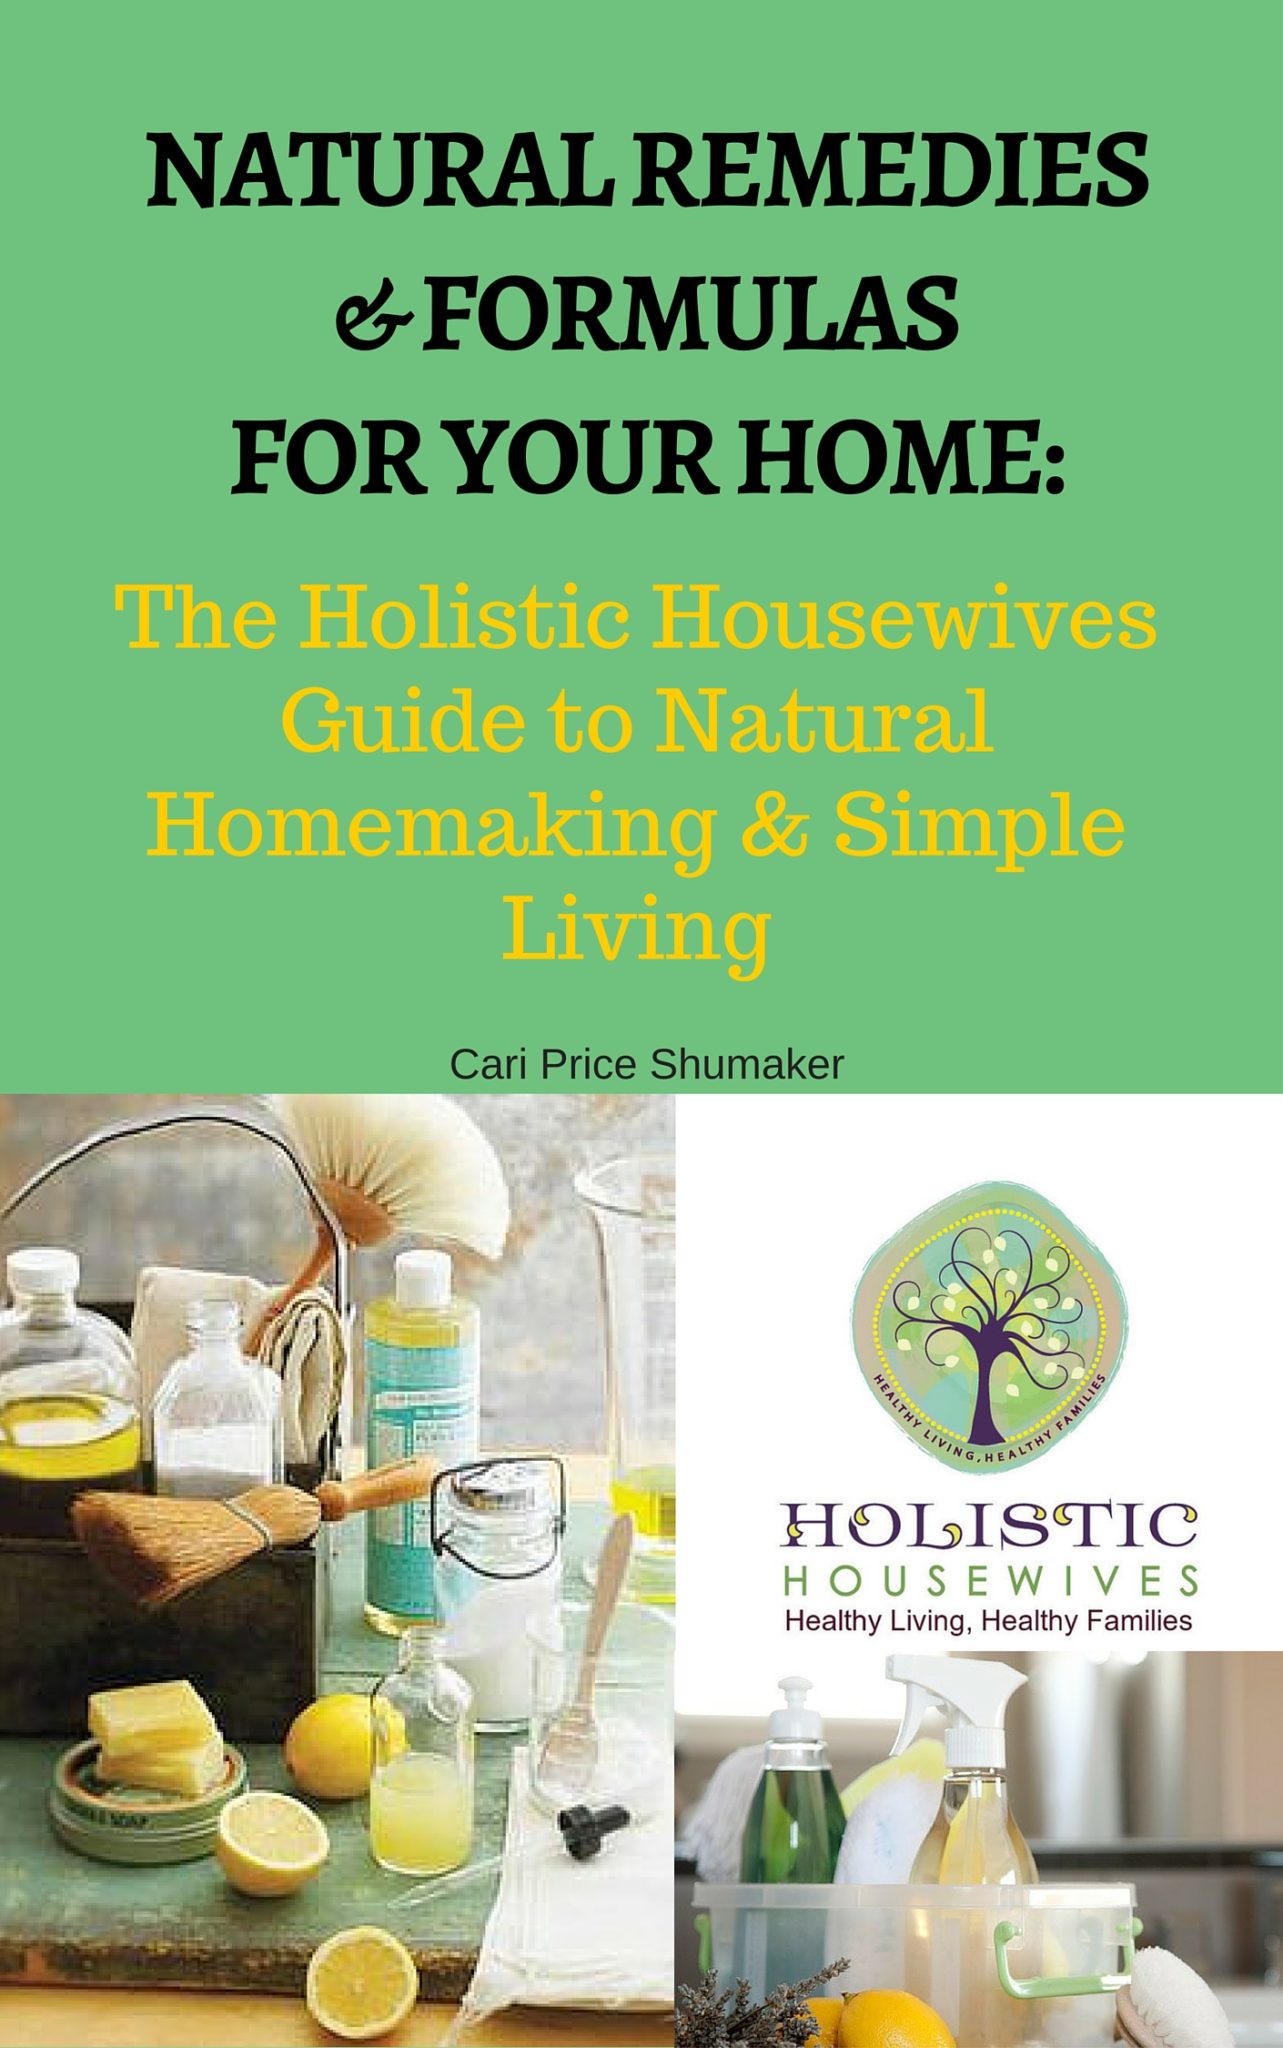 FREE: Natural Remedies and Formulas for Your Home:: The Holistic Housewives Guide to Natural Homemaking & Simple Living by Cari Shumaker